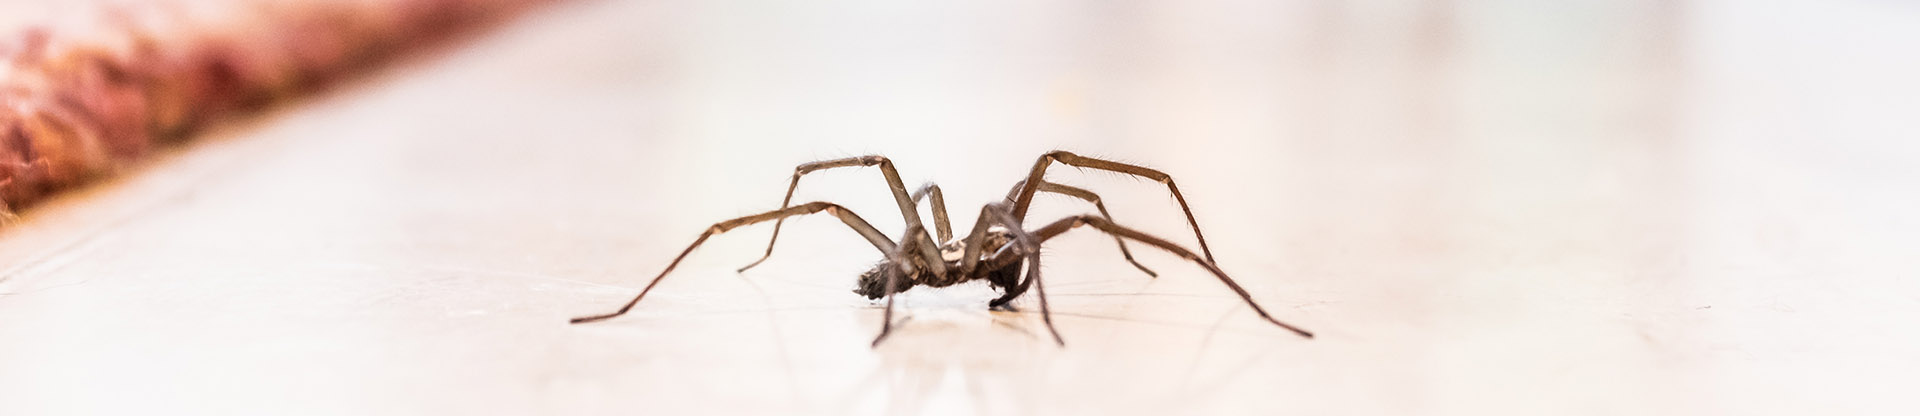 residential and commercial pest control for spiders